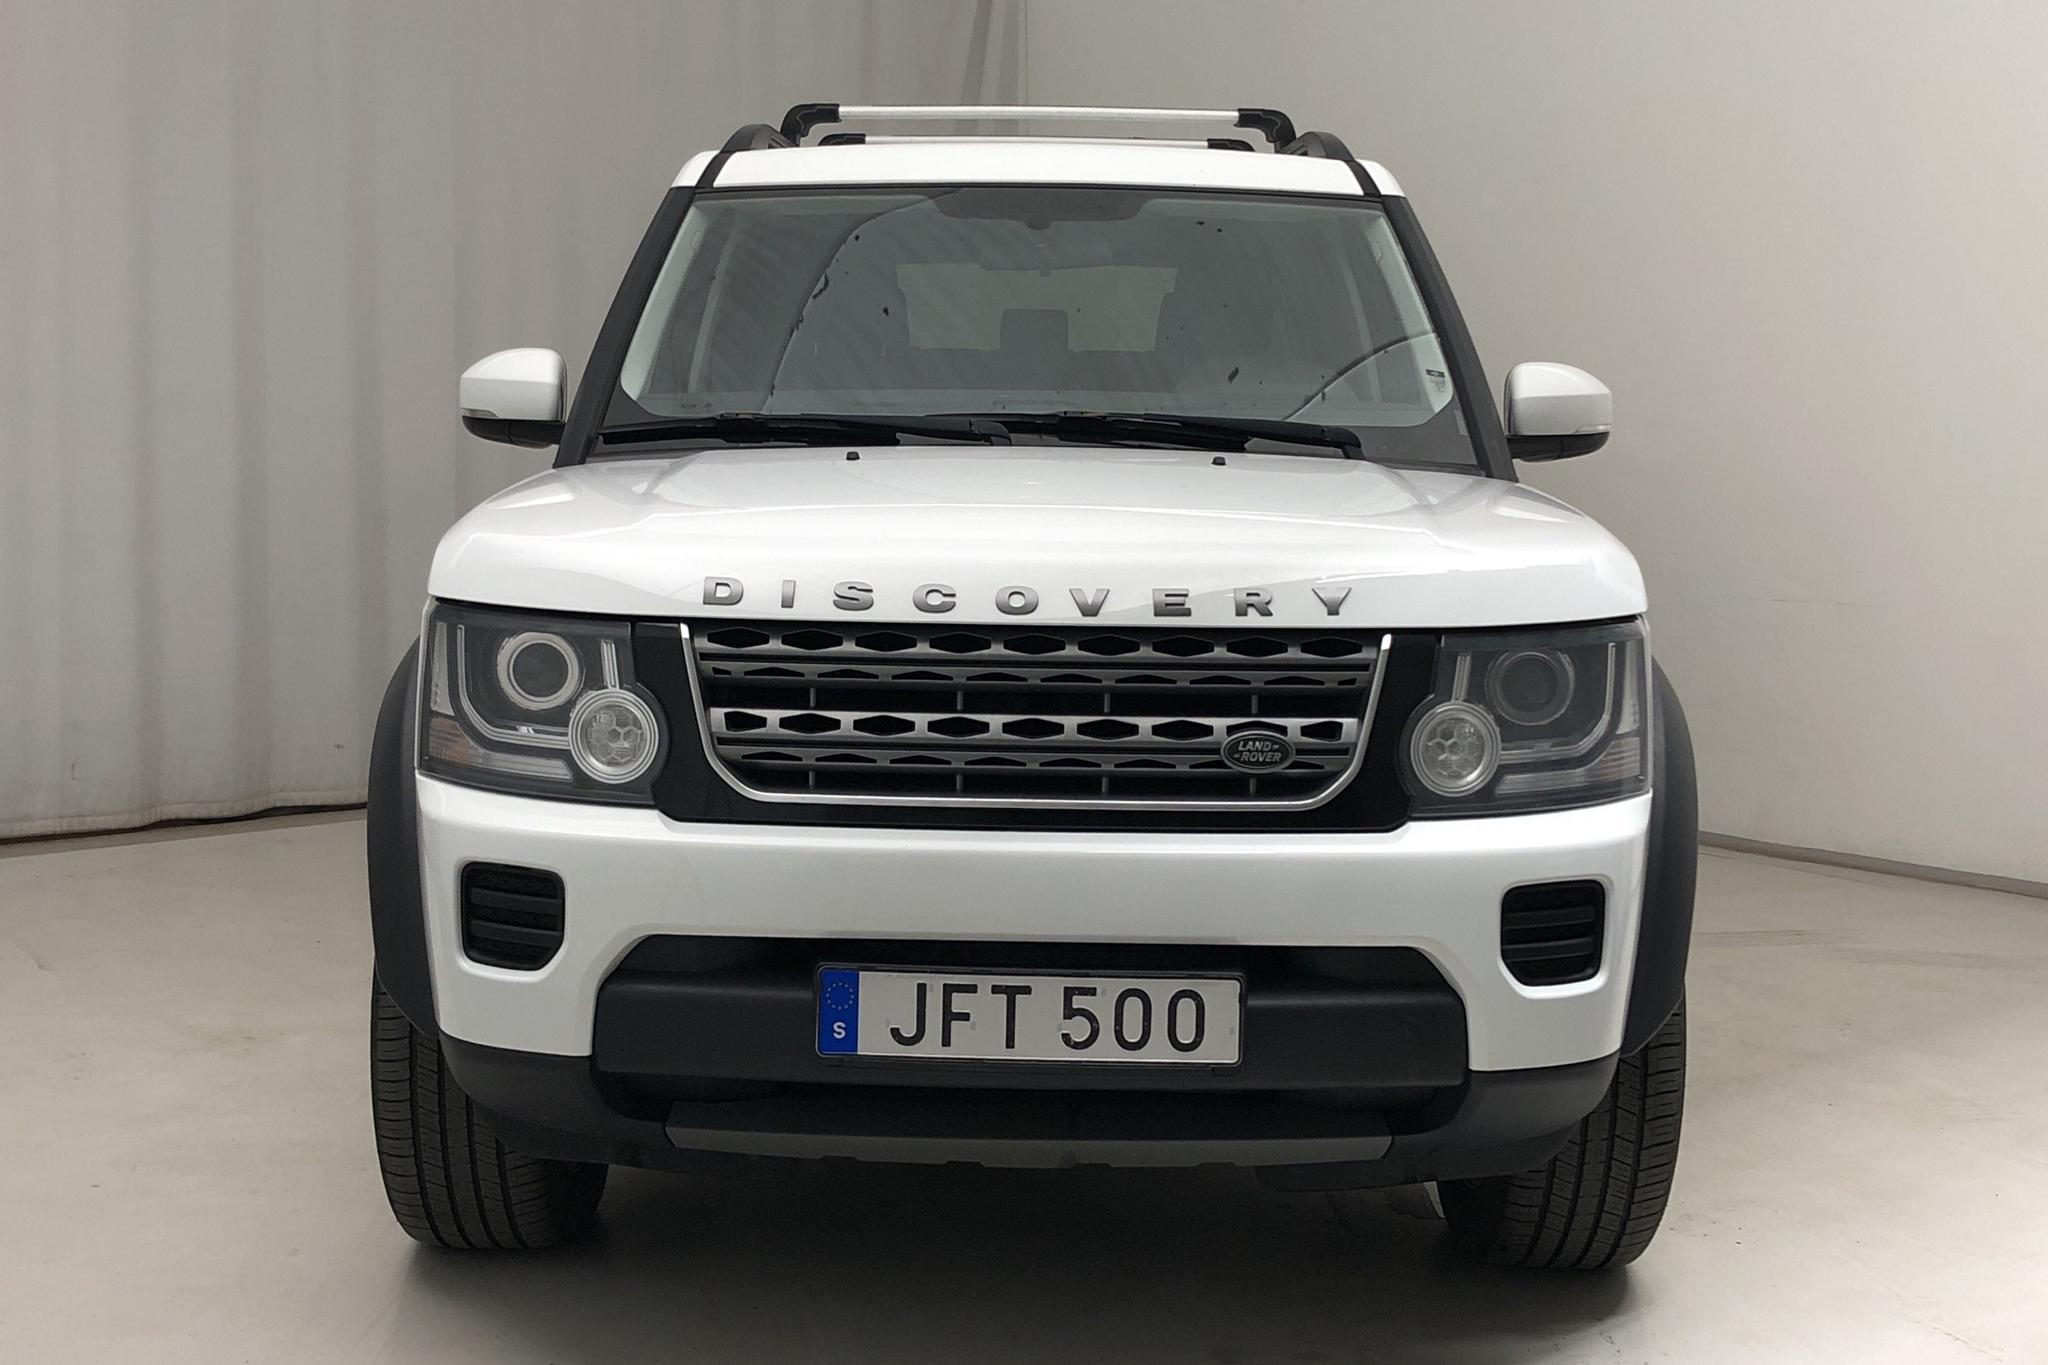 Land Rover Discovery 4 3.0 TDV6 (210hk) - 226 560 km - Automatic - white - 2014